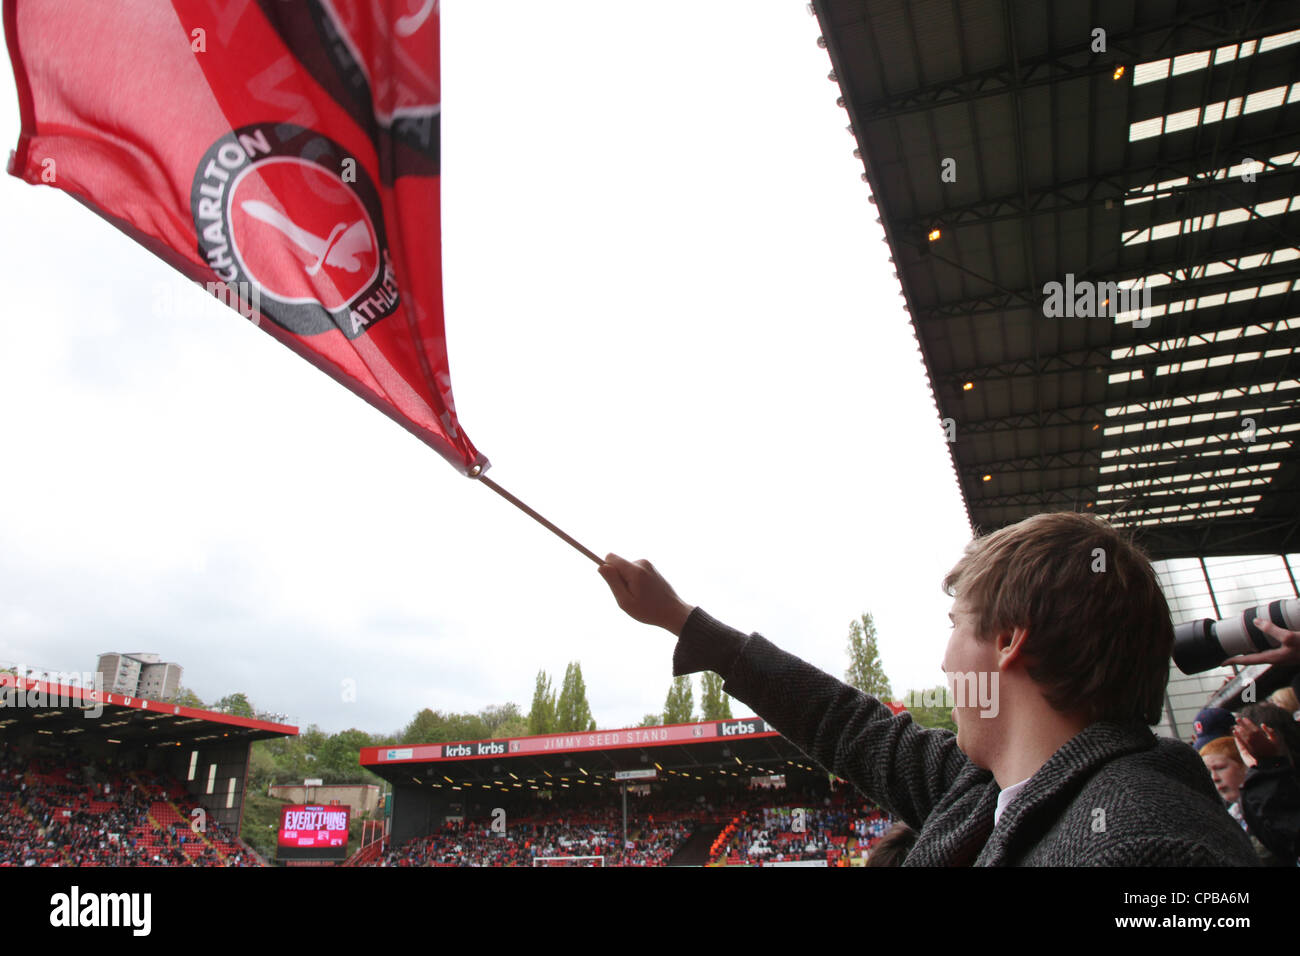 The day Charlton Athletic were crowned champions of league one a fan waves a flag. Stock Photo